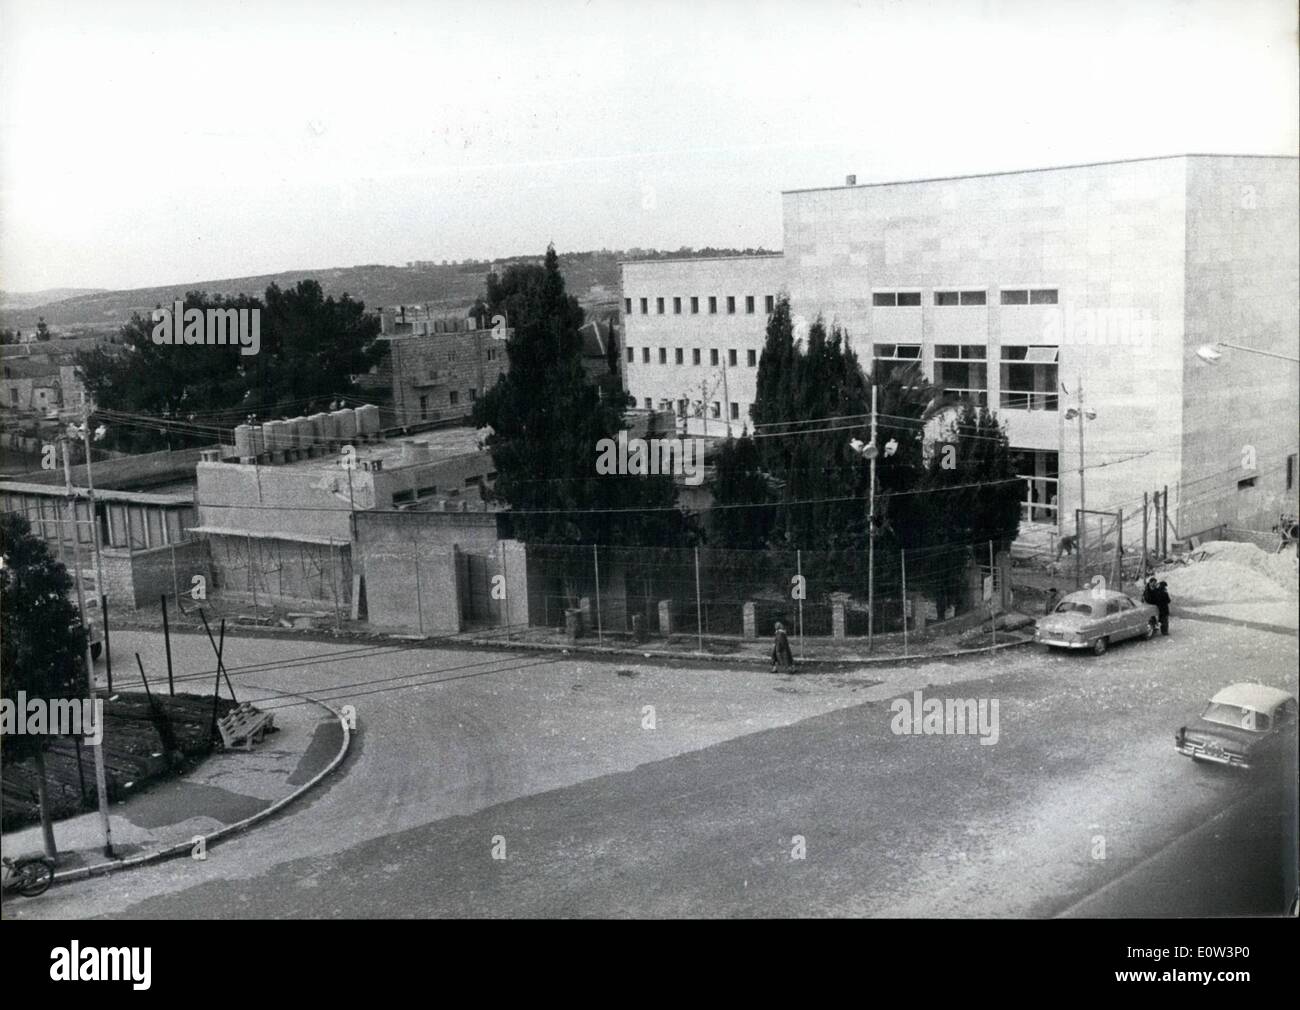 Mar. 03, 1961 - Preparations for the Eichmann trial.: On April 11th, 1961, in Jerusalem the trial against Adolf Eichmann, the former SS leader and the man ''responsible for the solving of the Jews problem'', will be opened. Our picture shows the ''People's House'' in Jerusalem where the trial will be held. Stock Photo